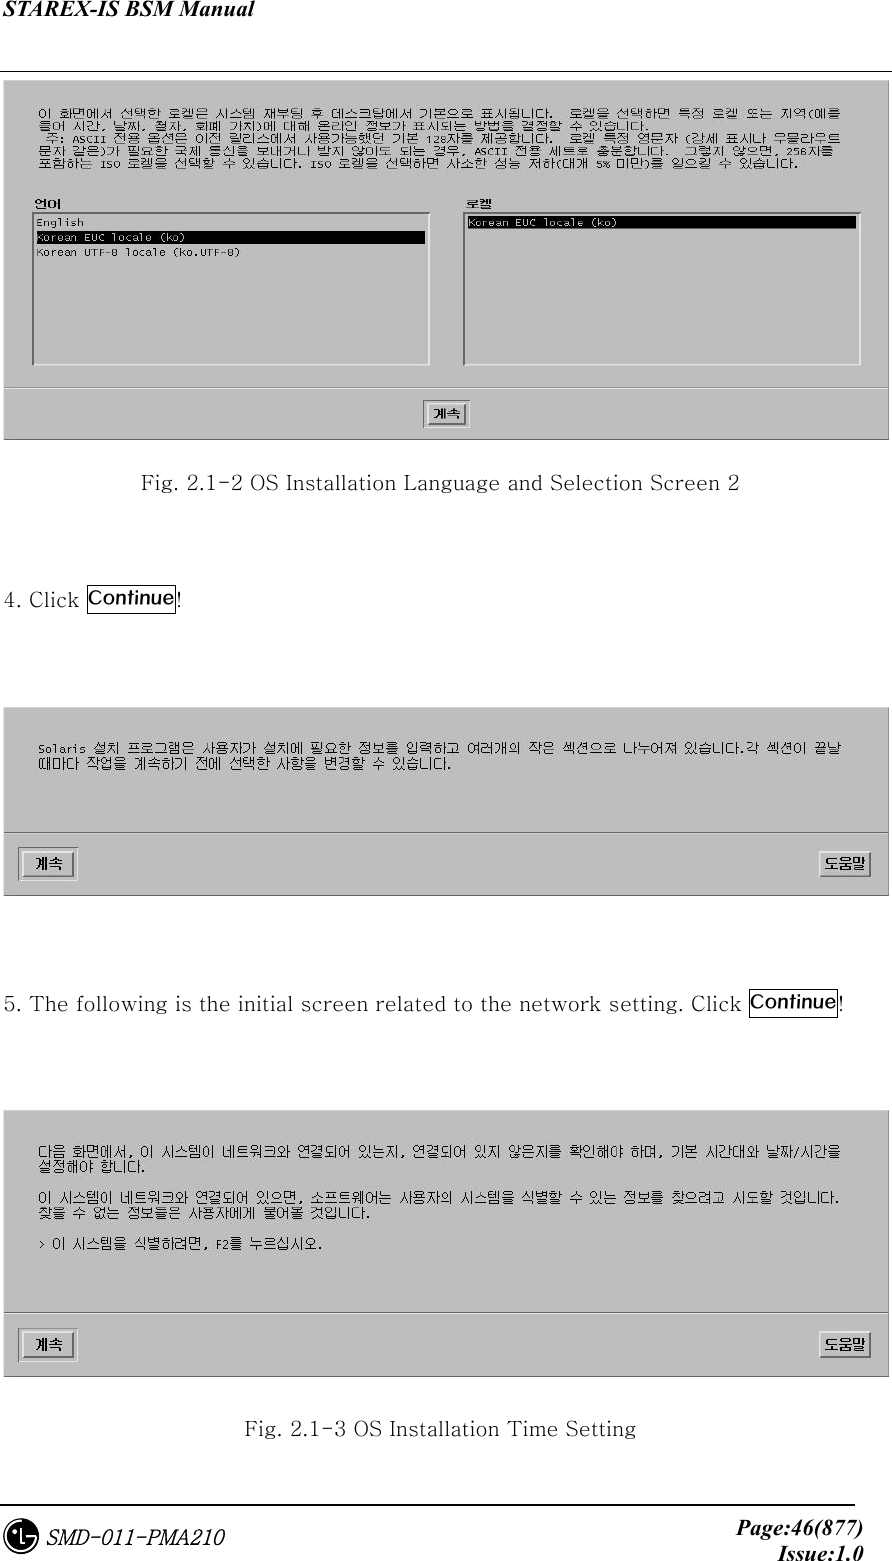 STAREX-IS BSM Manual     Page:46(877)Issue:1.0SMD-011-PMA210  Fig. 2.1-2 OS Installation Language and Selection Screen 2  4. Click Continue!    5. The following is the initial screen related to the network setting. Click Continue!   Fig. 2.1-3 OS Installation Time Setting   